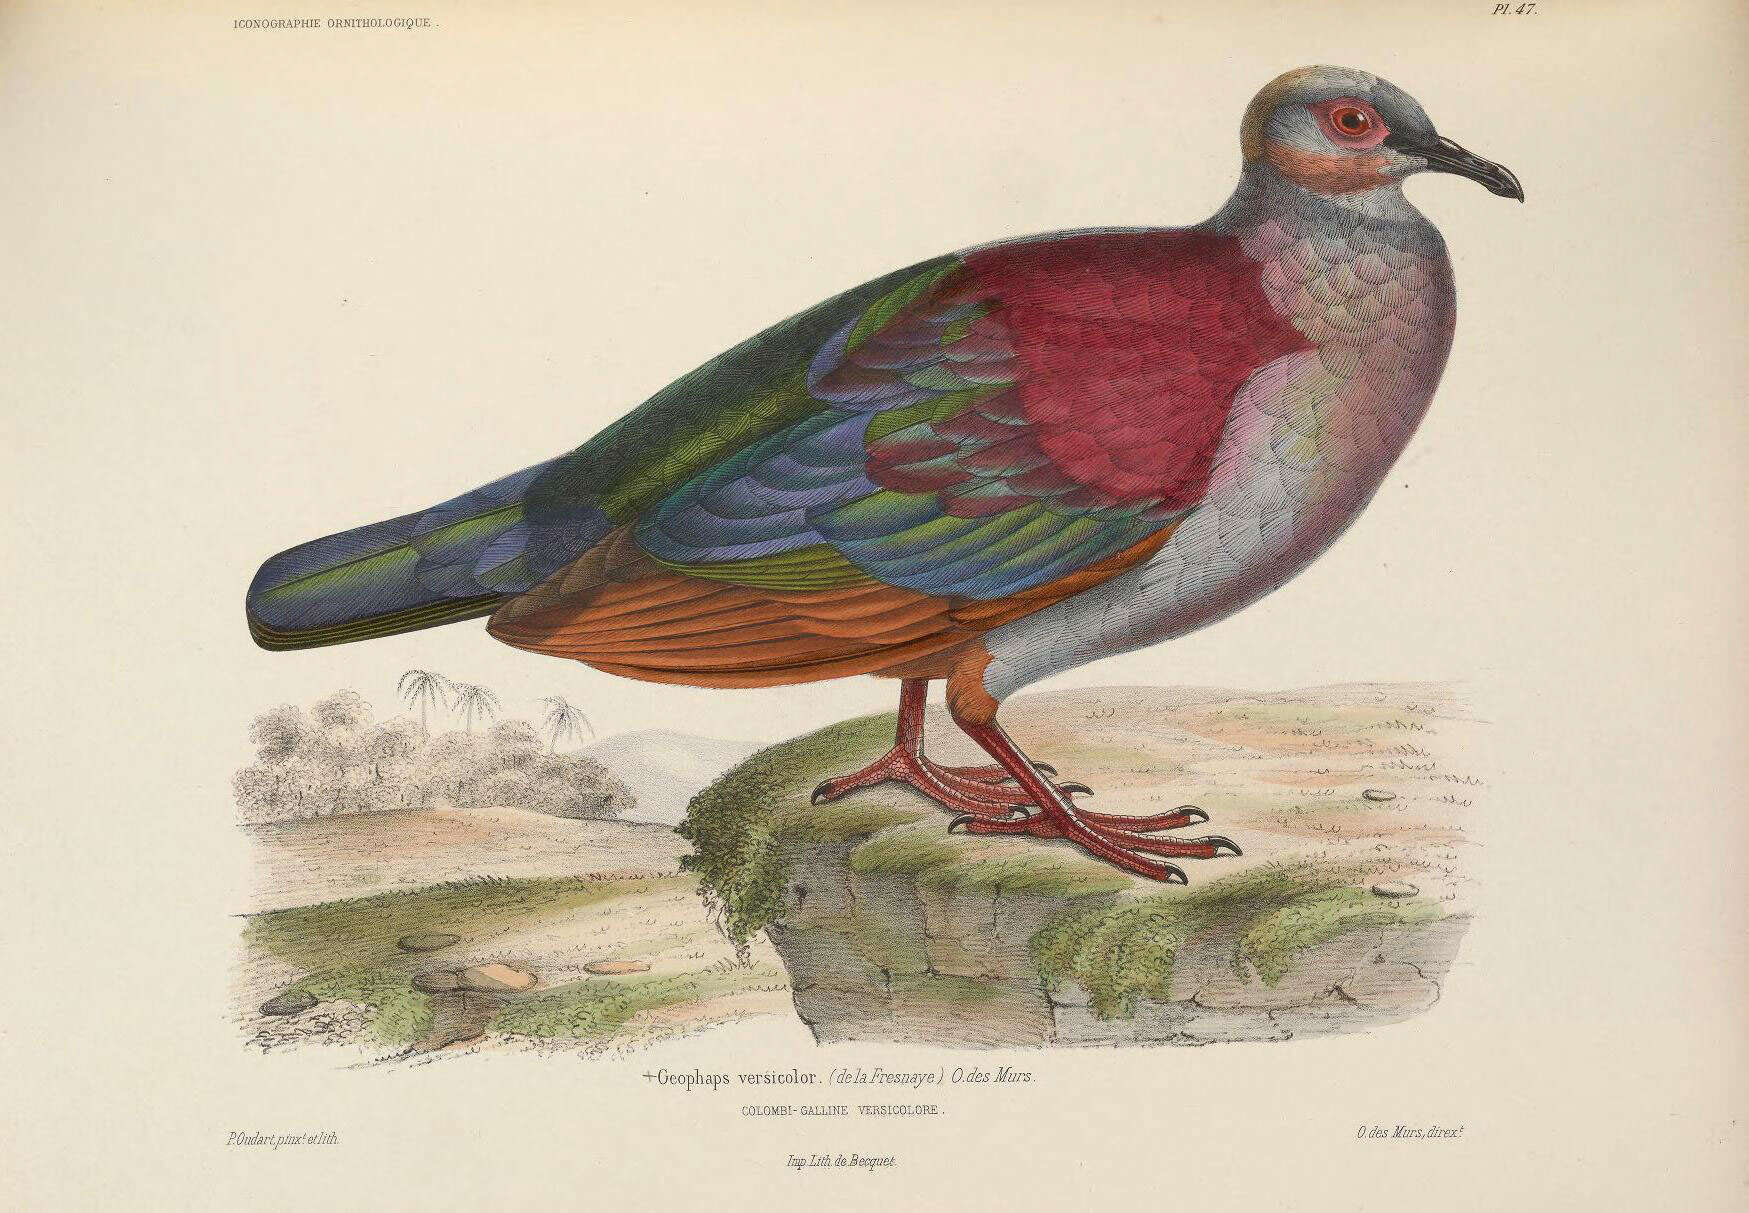 Image of Crested Quail-Dove